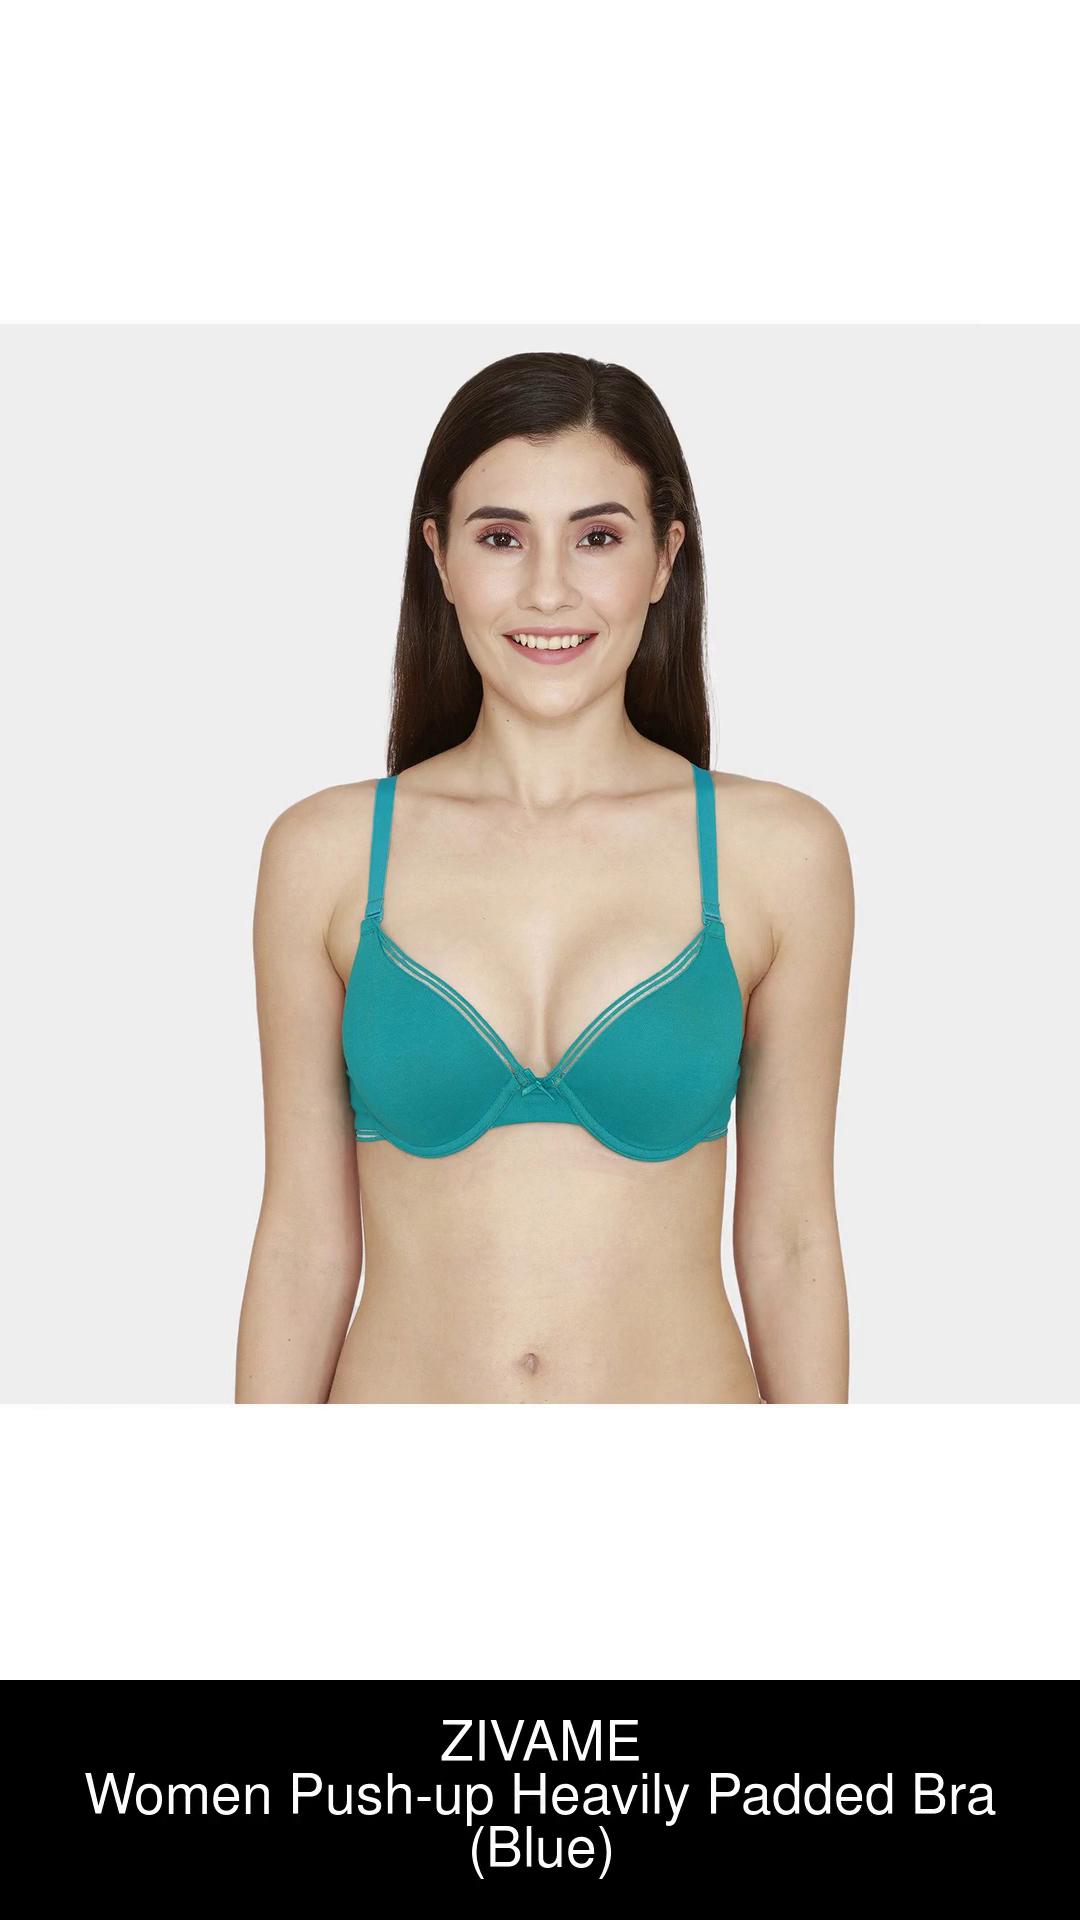 Zivame Women Push Up Heavily Padded Bra Reviews: Latest Review of